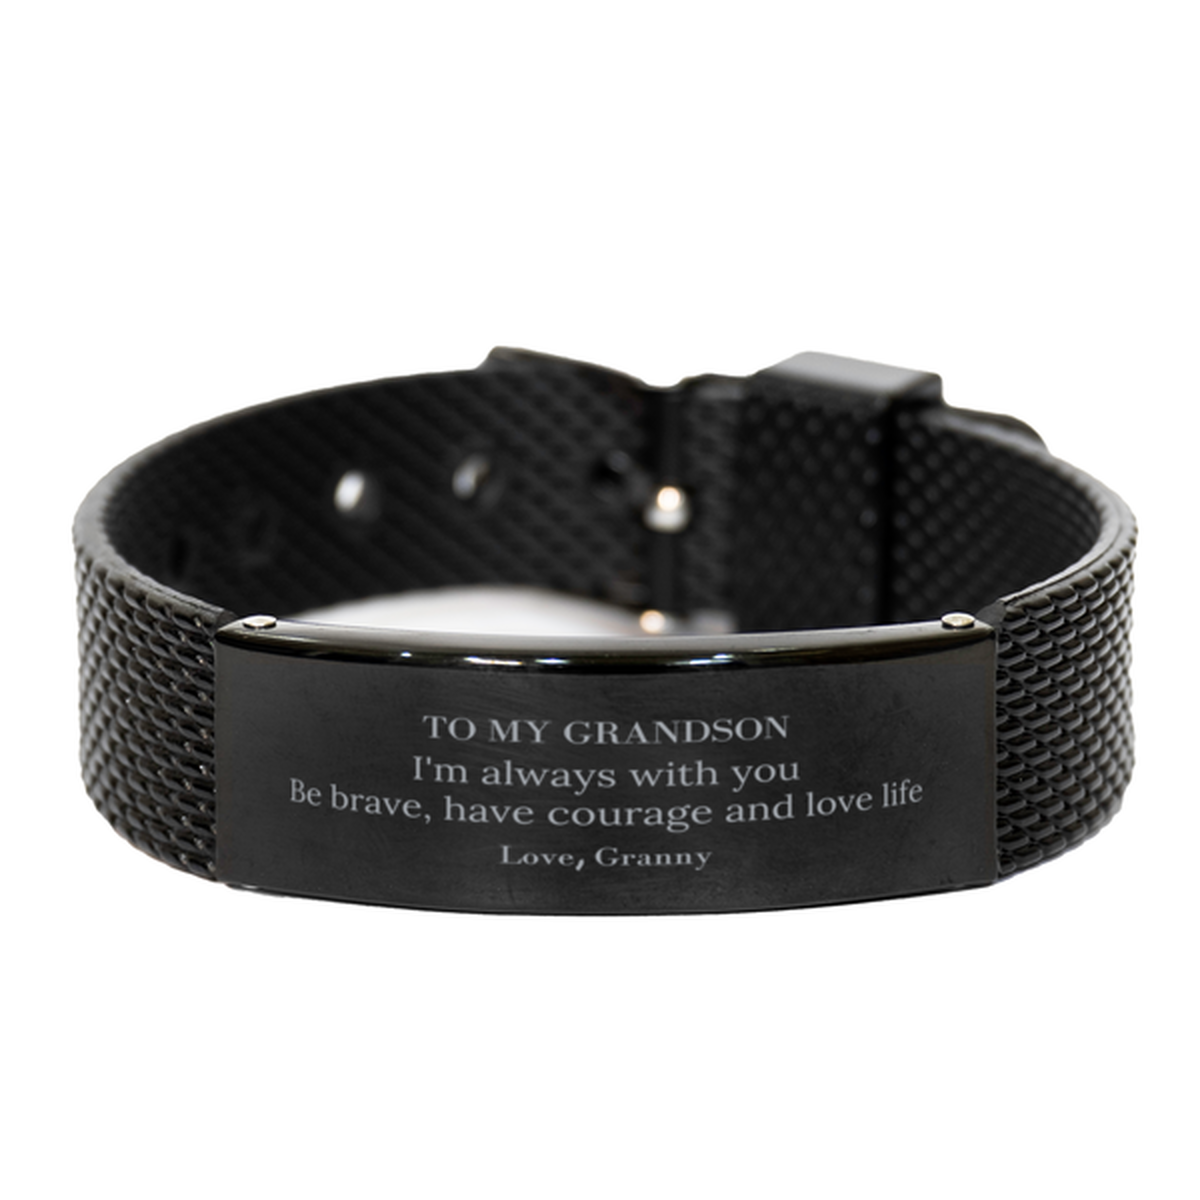 To My Grandson Gifts from Granny, Unique Black Shark Mesh Bracelet Inspirational Christmas Birthday Graduation Gifts for Grandson I'm always with you. Be brave, have courage and love life. Love, Granny